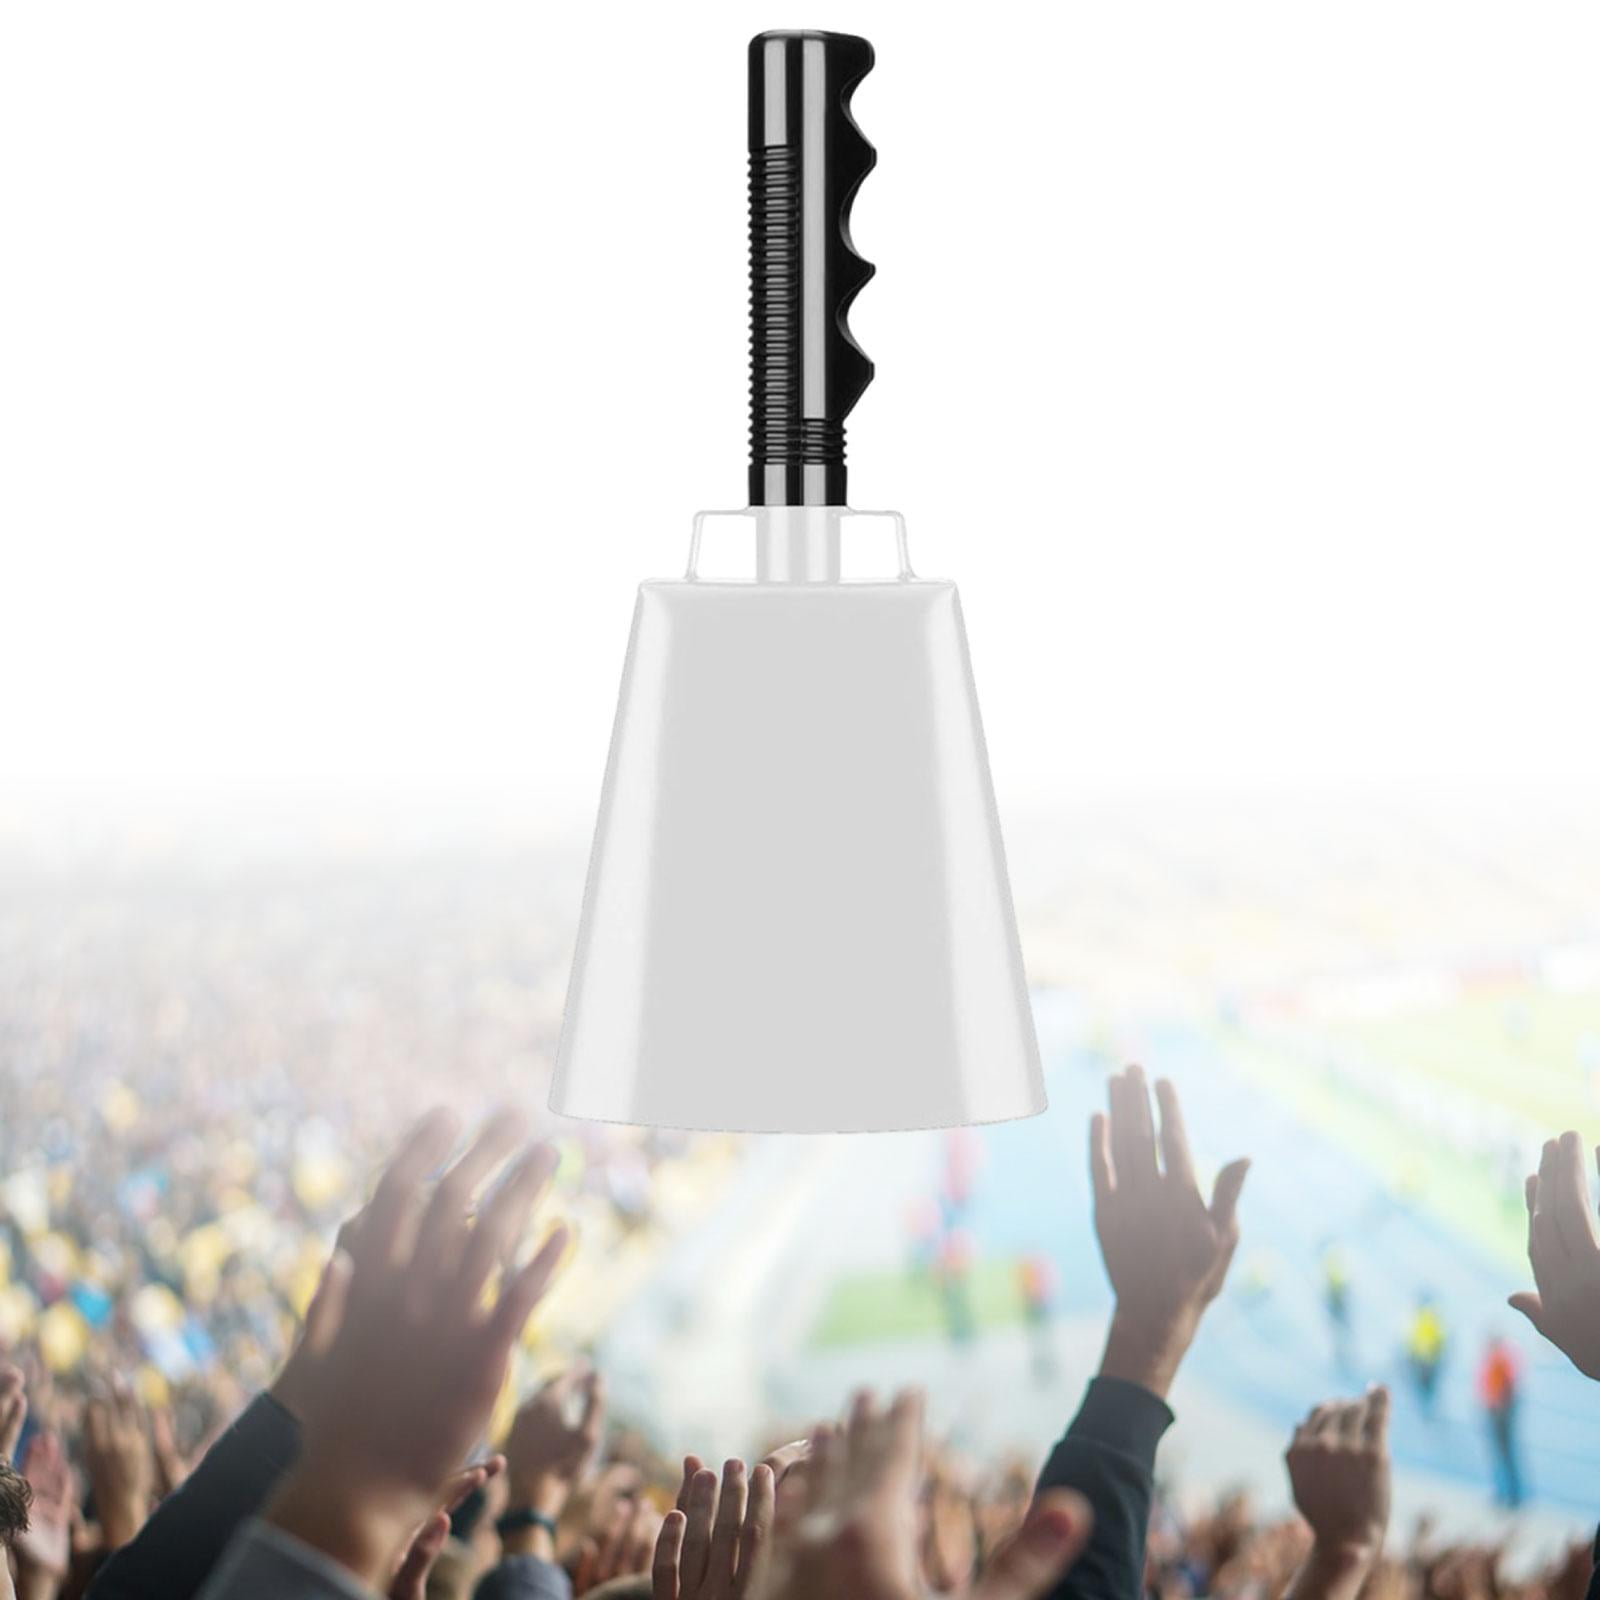 Musfunny Steel Cow Bell with Handle Cowbells, Cheering Hand Bells Loud  Noise Makers for Sporting Events,Football Games,School Bell,Farm Hand  Chimes